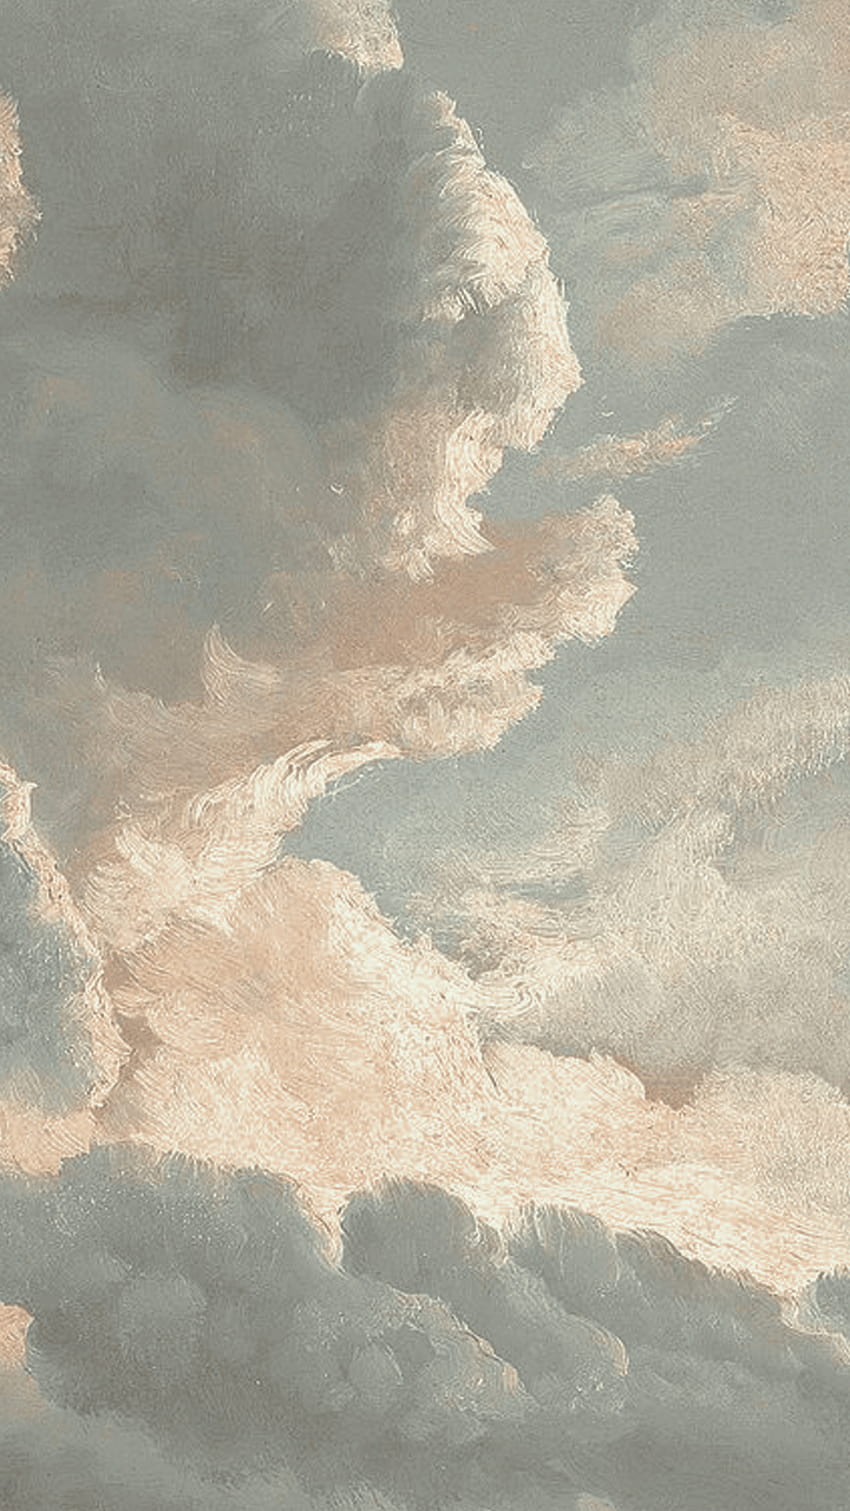 A painting of a sky with clouds - Cream, light academia